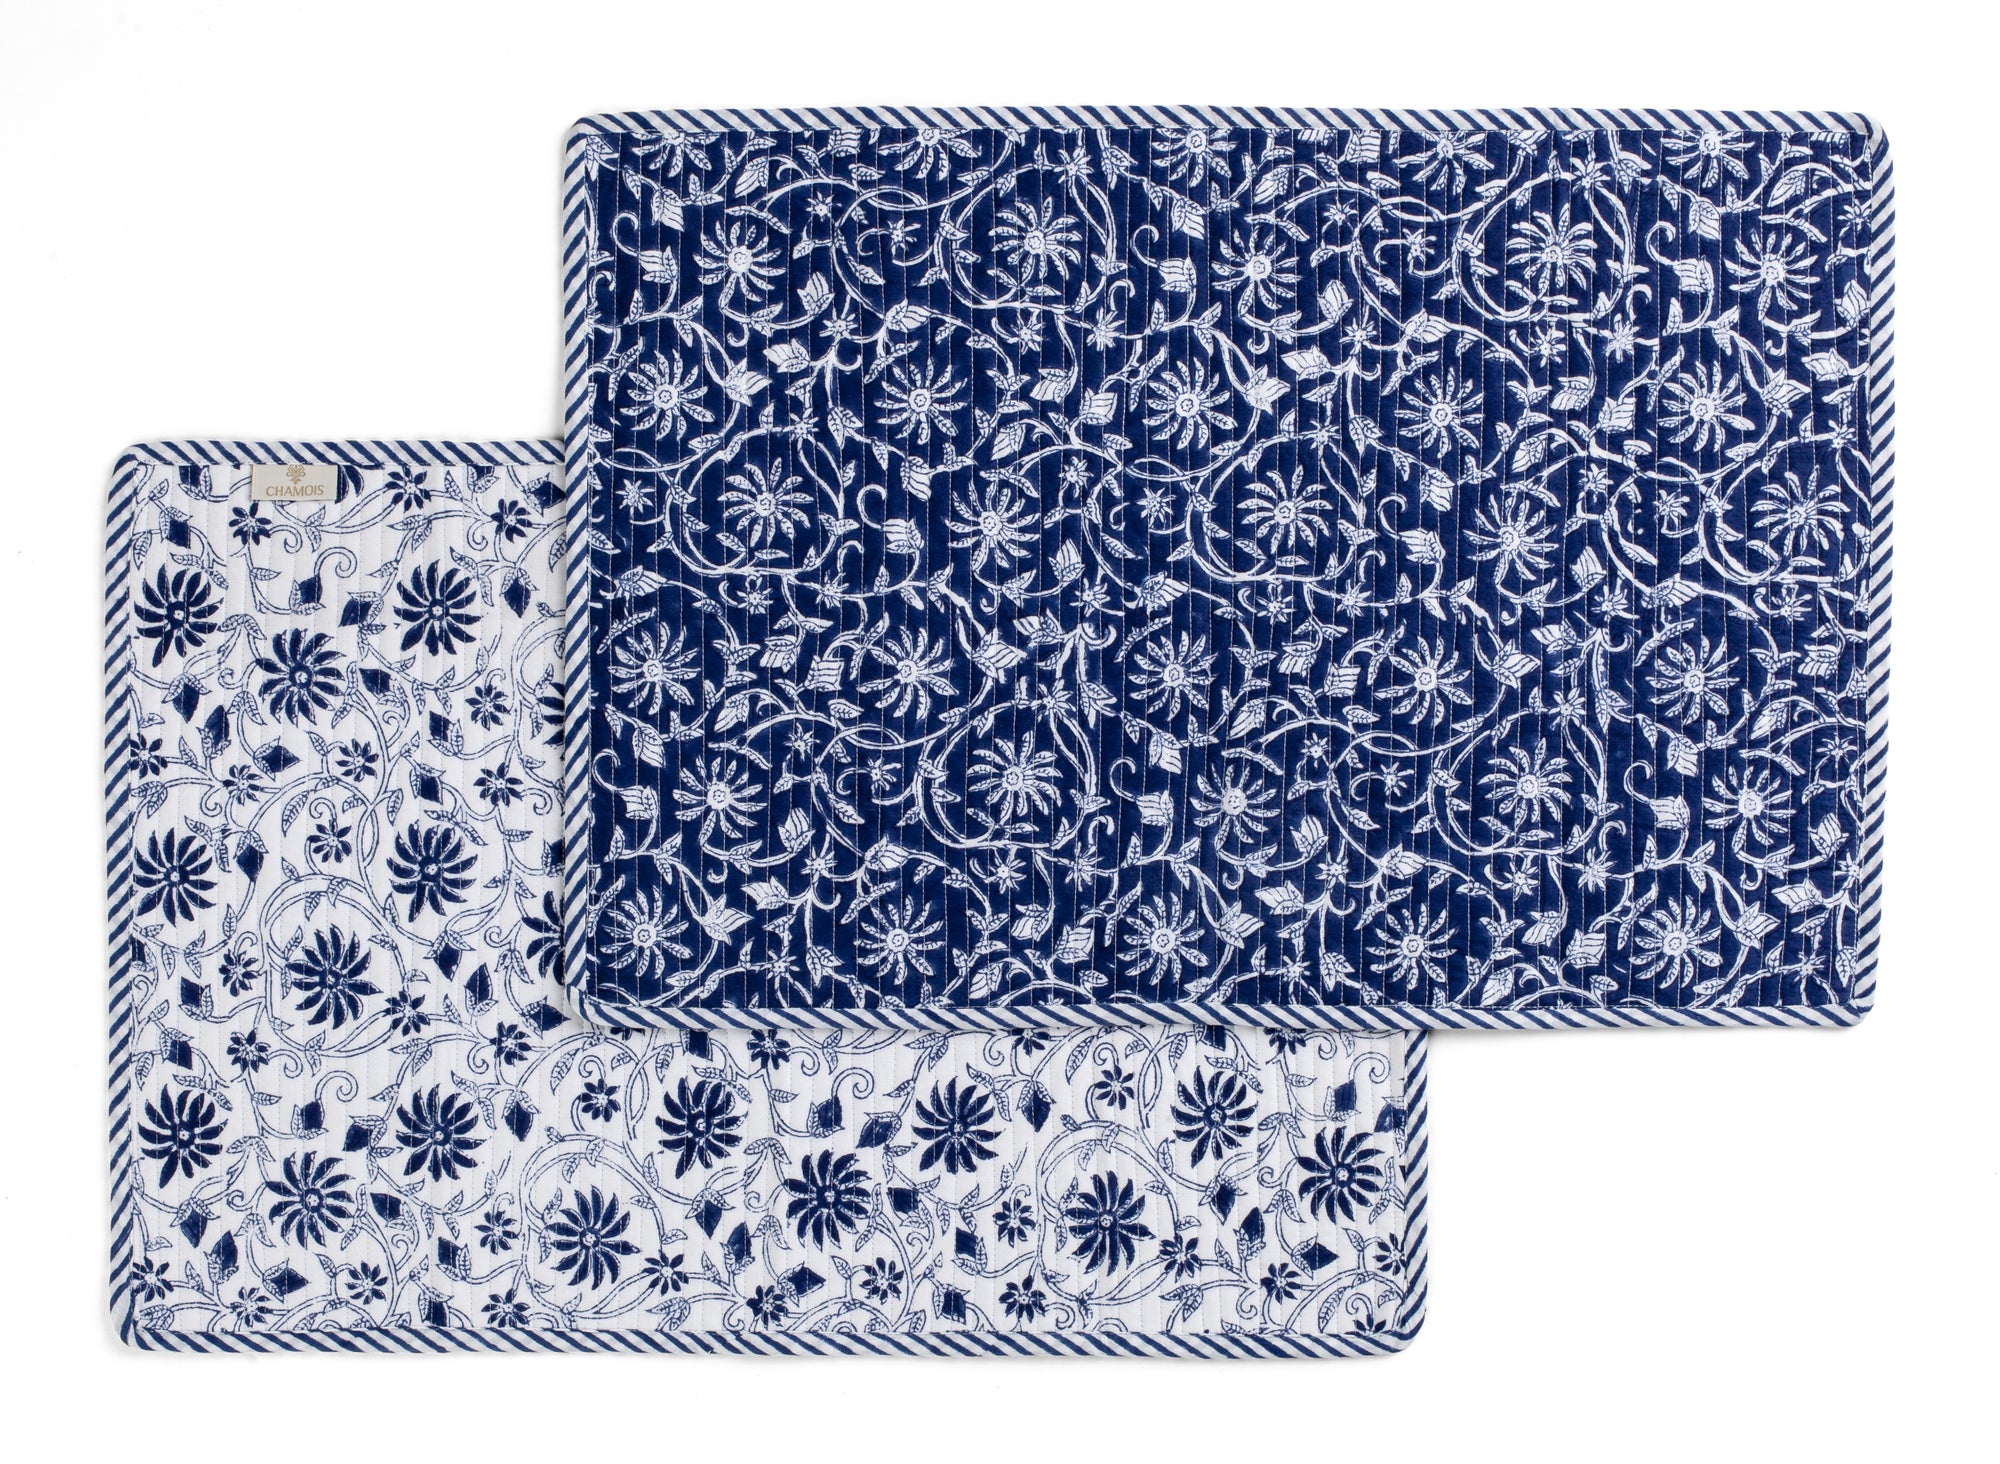 Cotton Quilted Placemat Margerita Design - Navy Blue